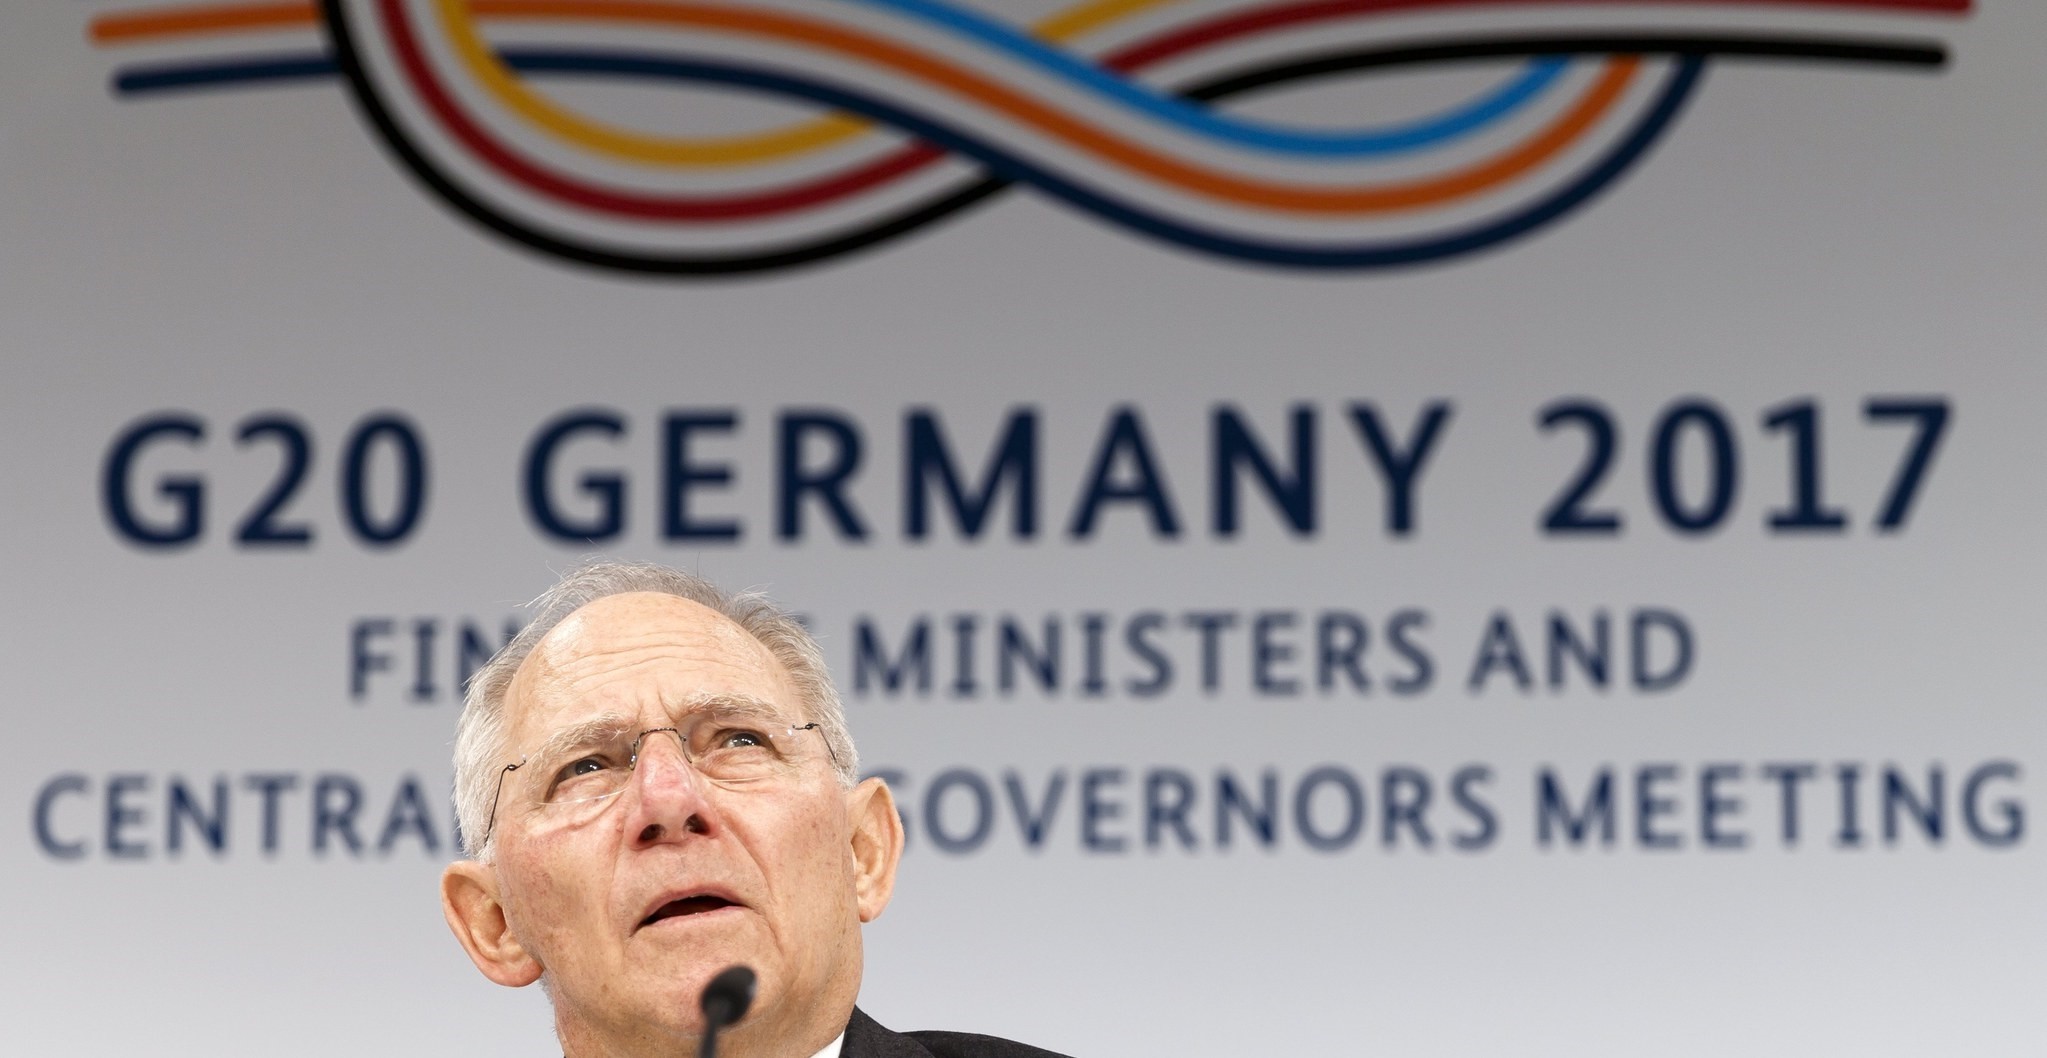 German Finance Minister Wolfgang Schaeuble speaks during a press conference during the G20 Finance Ministers and Bank Governors meeting in Baden Baden.